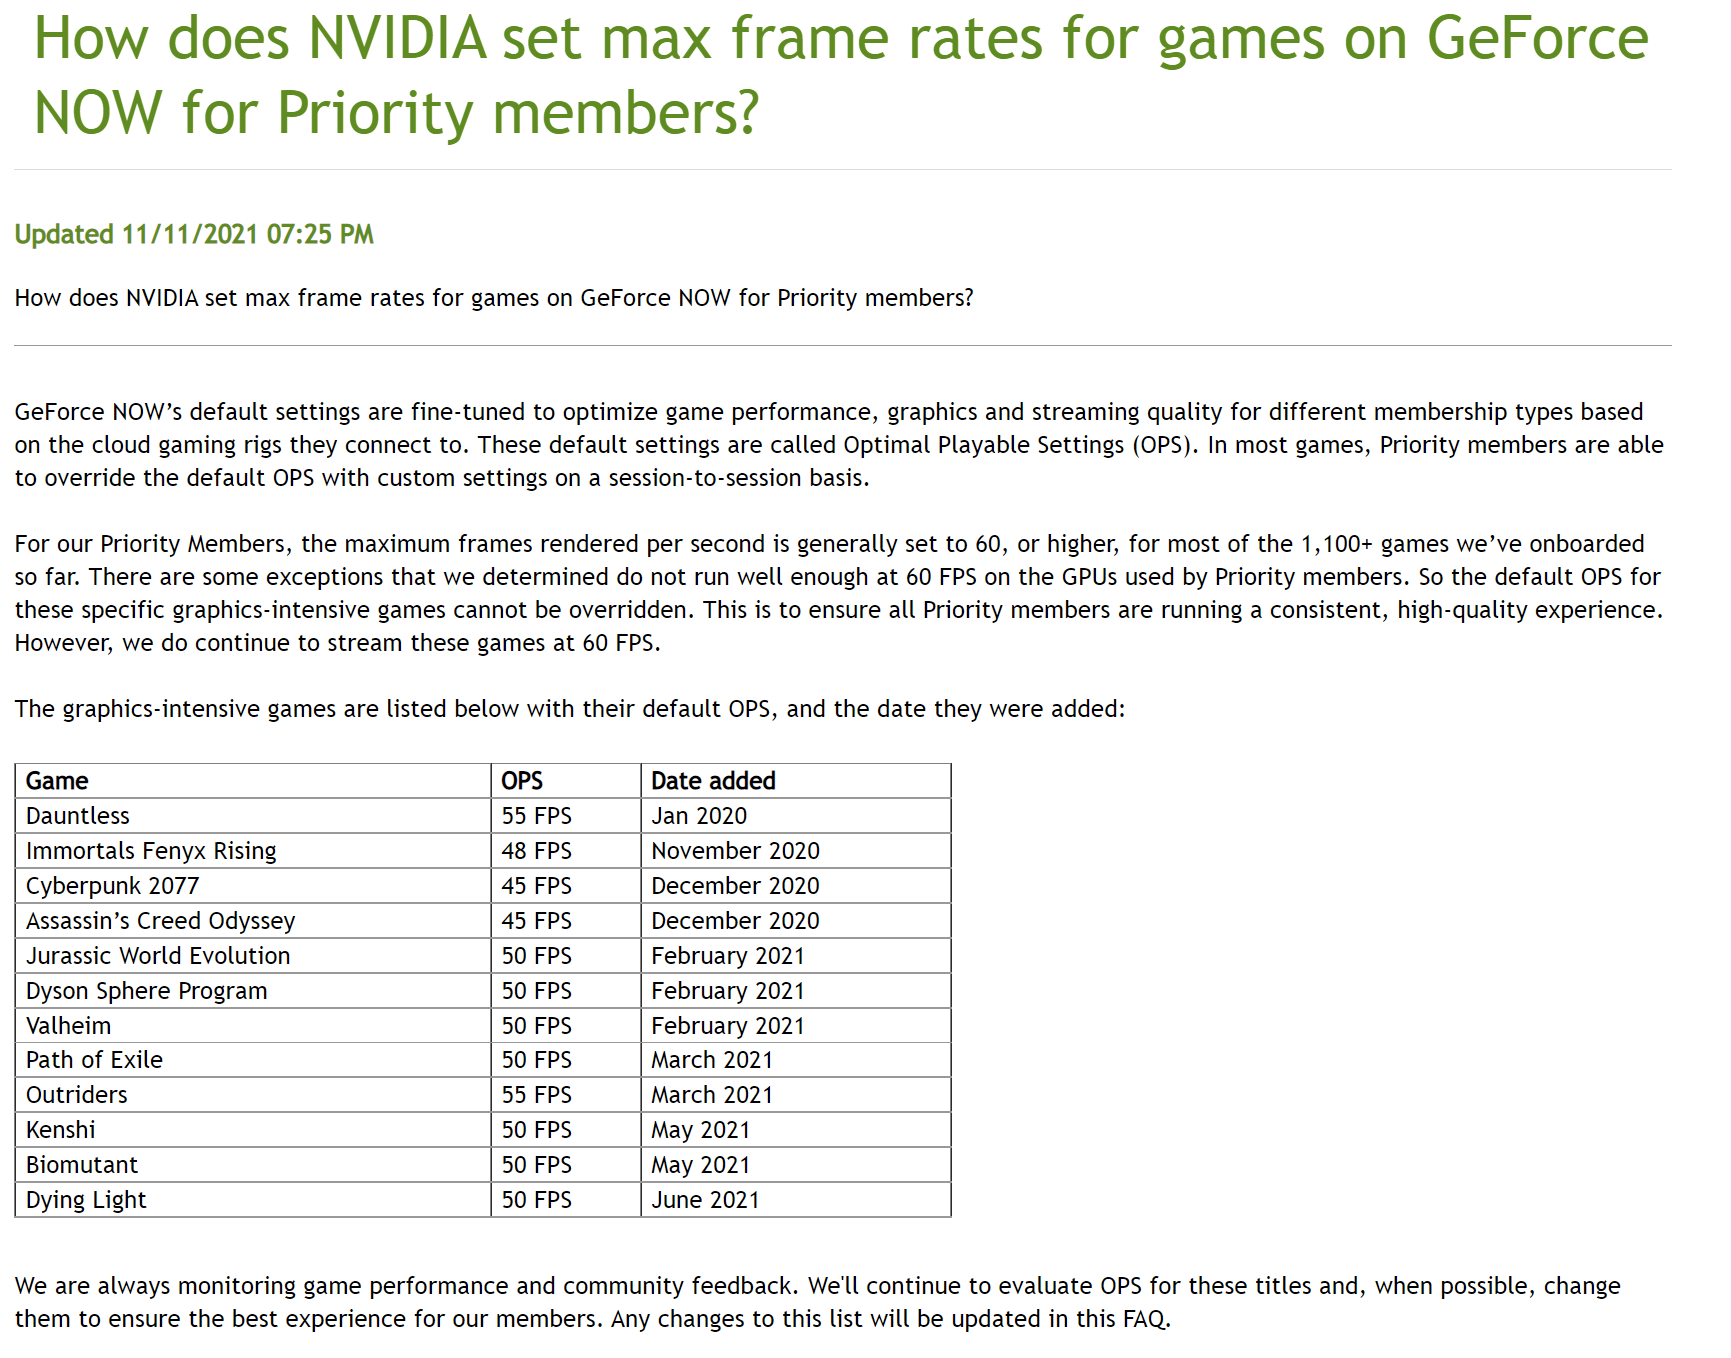 Nvidia Admits To Be Capping Frame Rate Below 60 Fps For Geforce Now Priority Members Videocardz Com